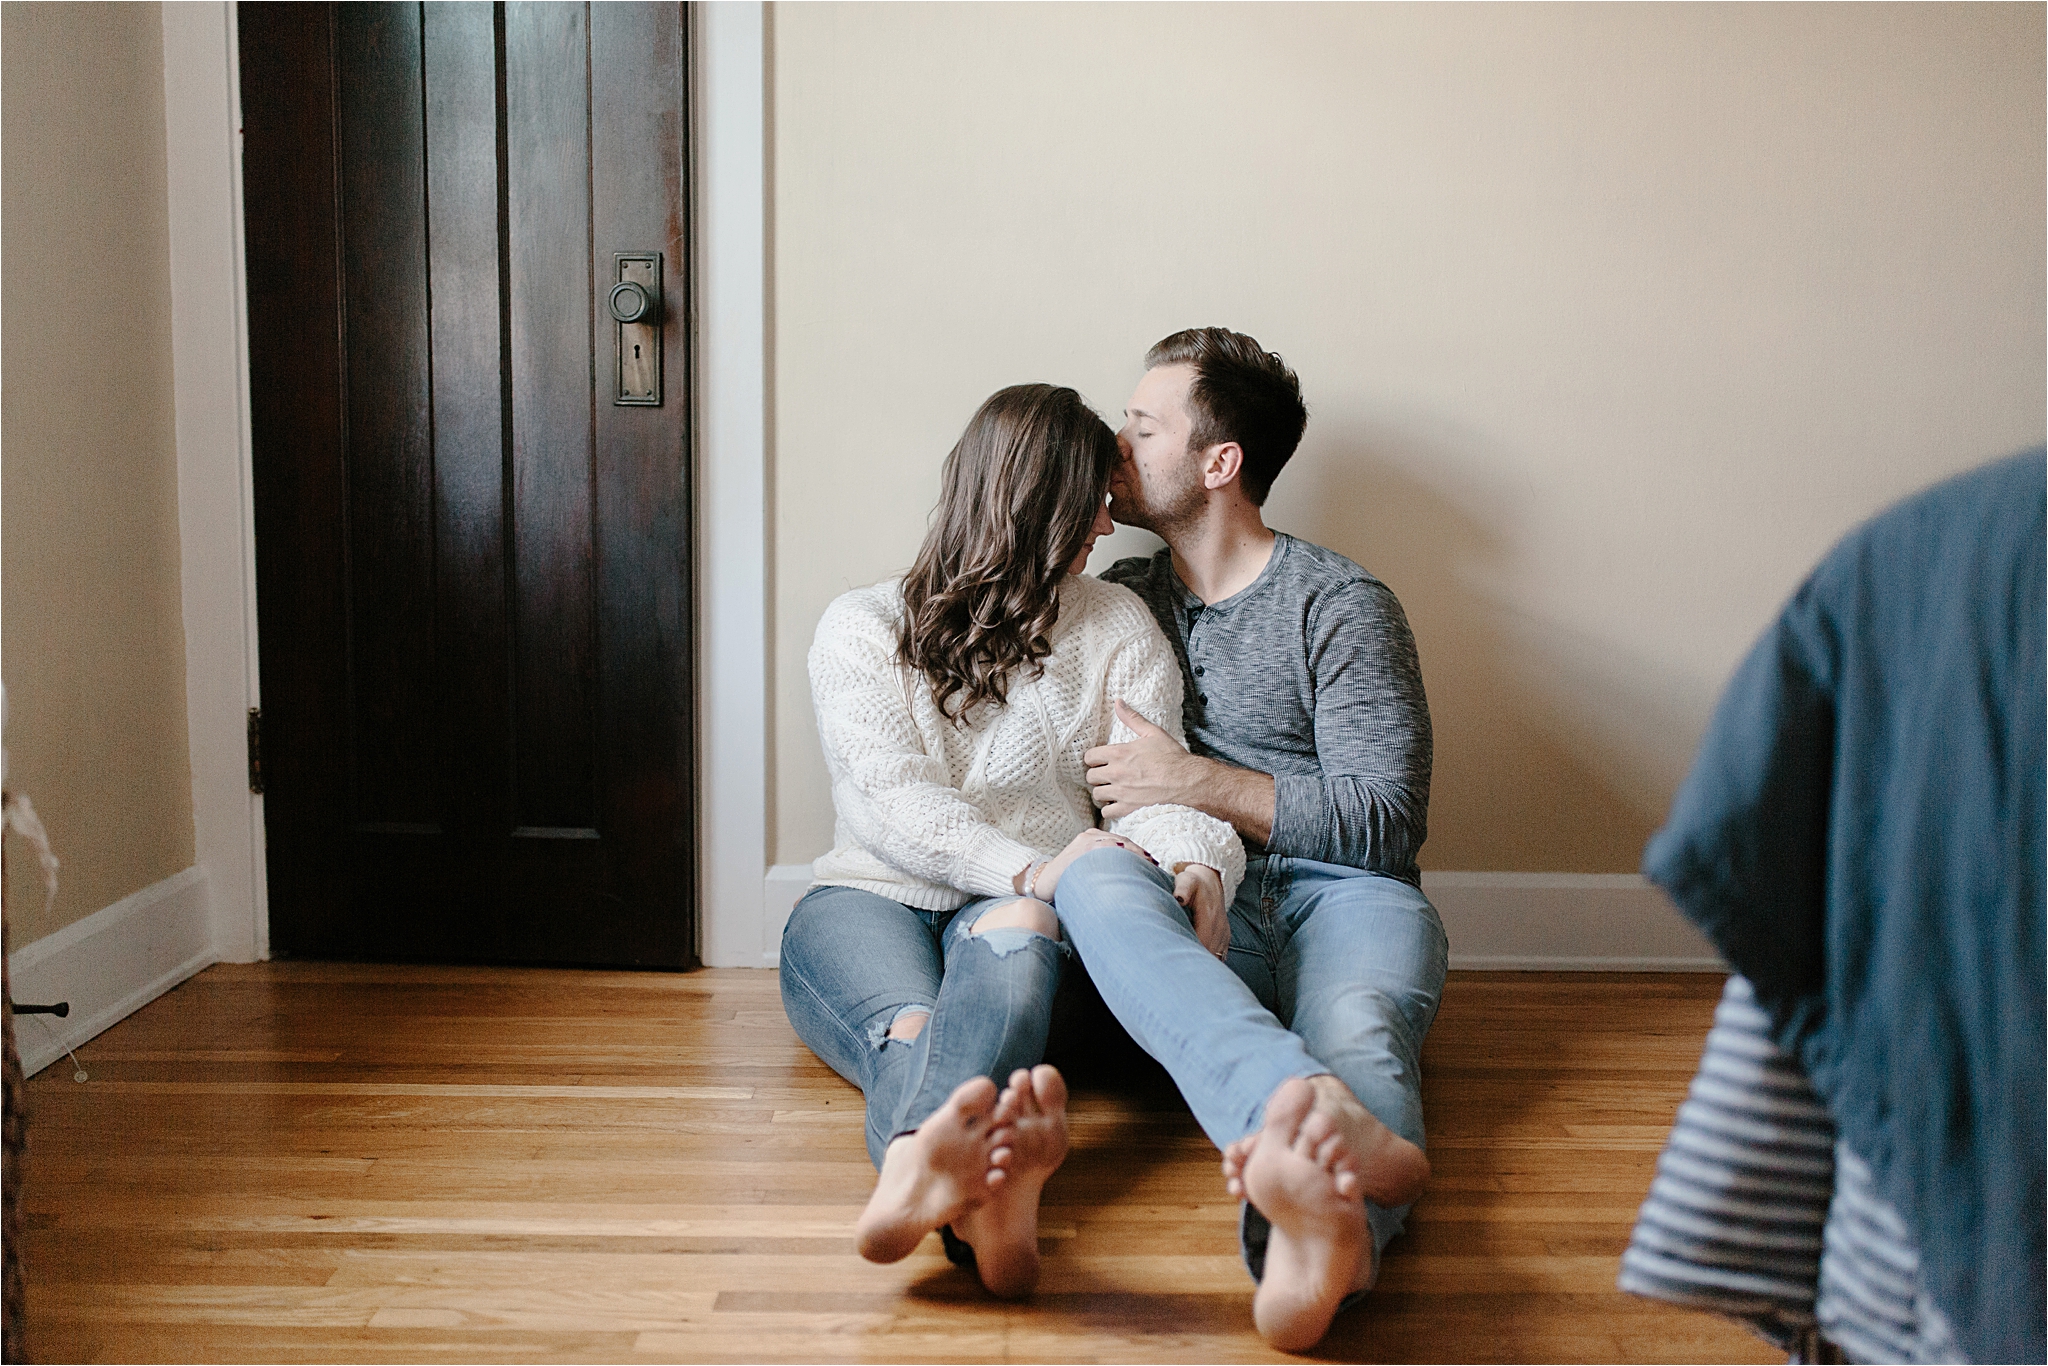  Lifestyle Engagement Session by Austin & Rachel Photography